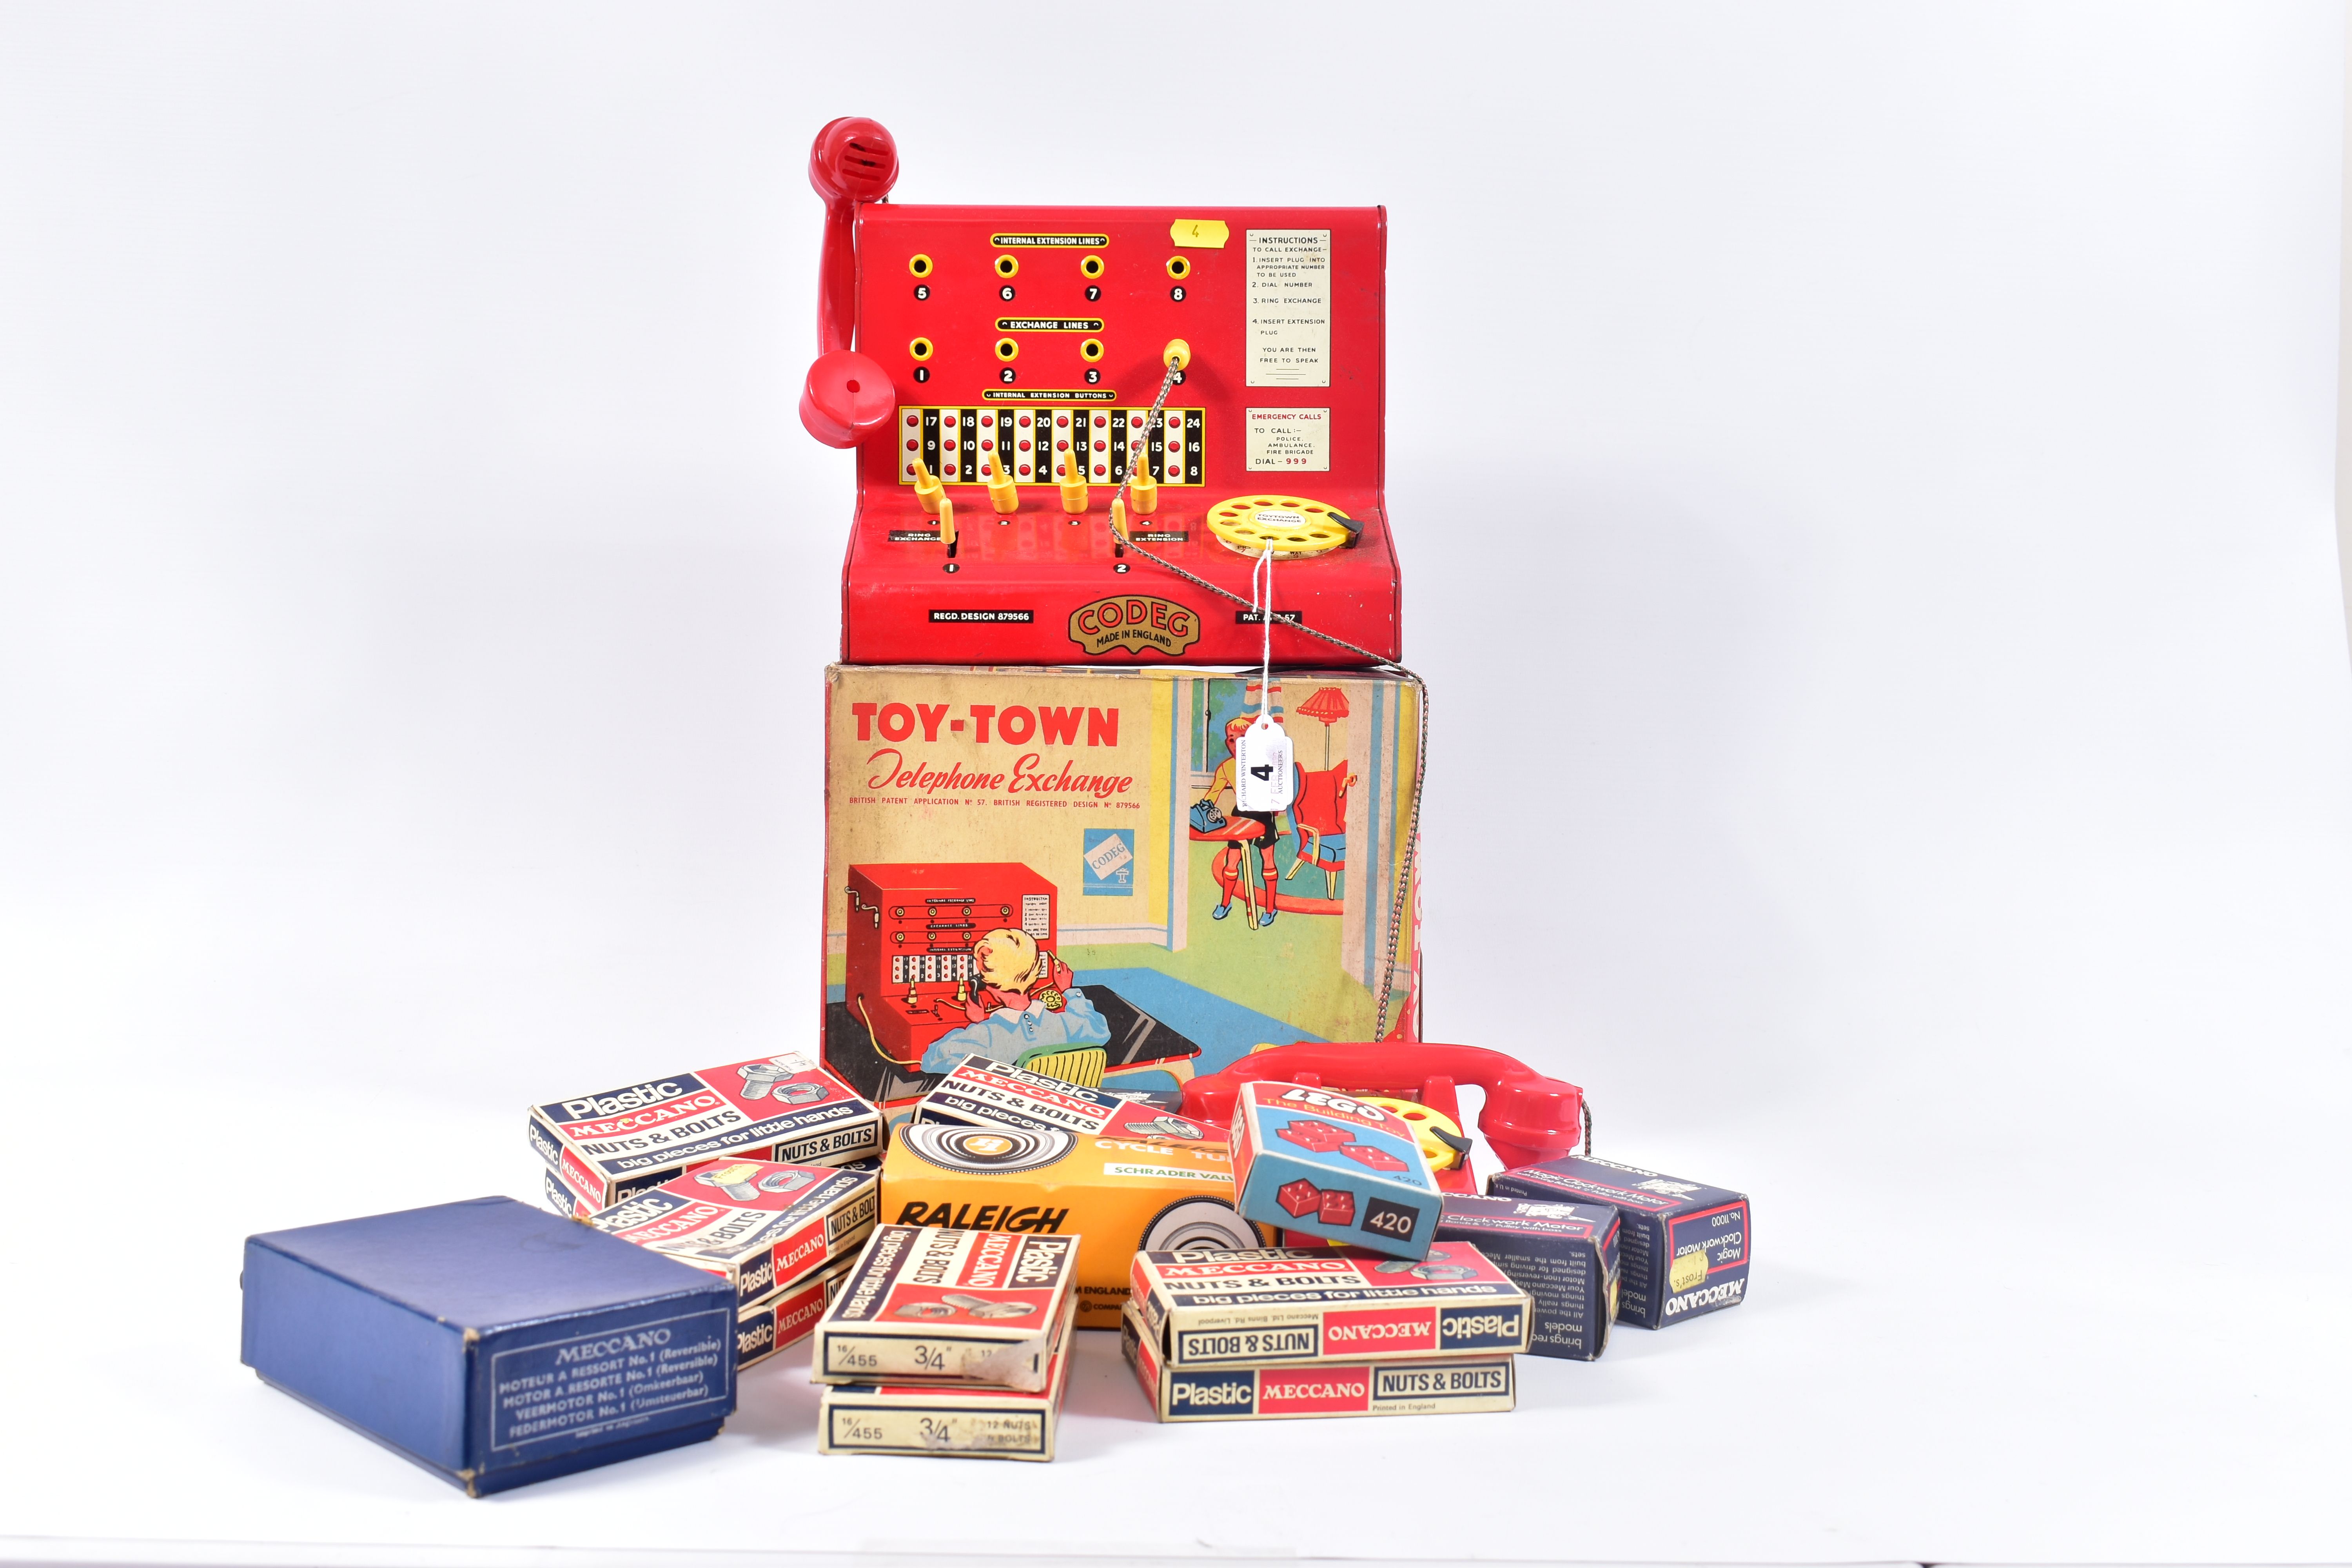 A BOXED CODEG TOY-TOWN TELEPHONE EXCHANGE, of tinplate and plastic construction, exchange unit is